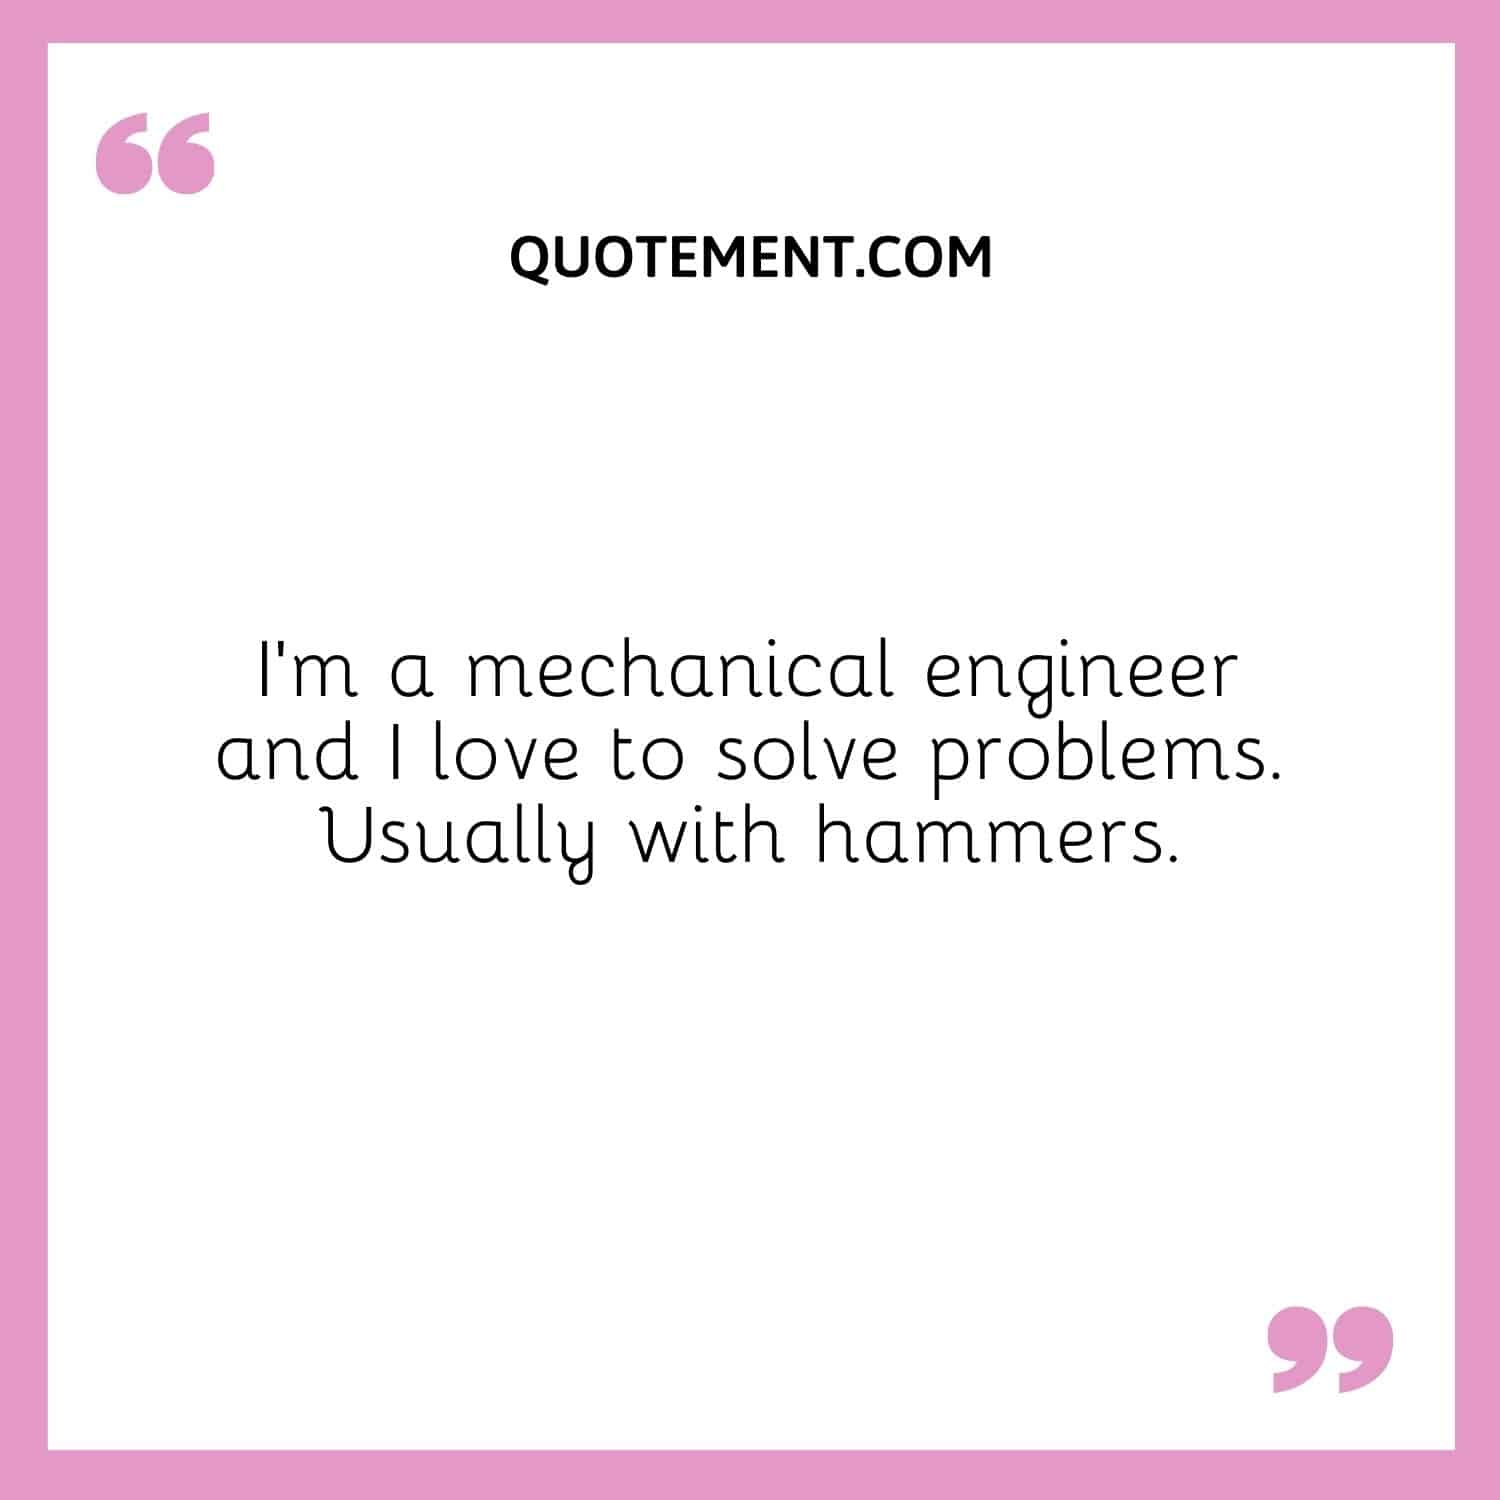 I’m a mechanical engineer and I love to solve problems. Usually with hammers.